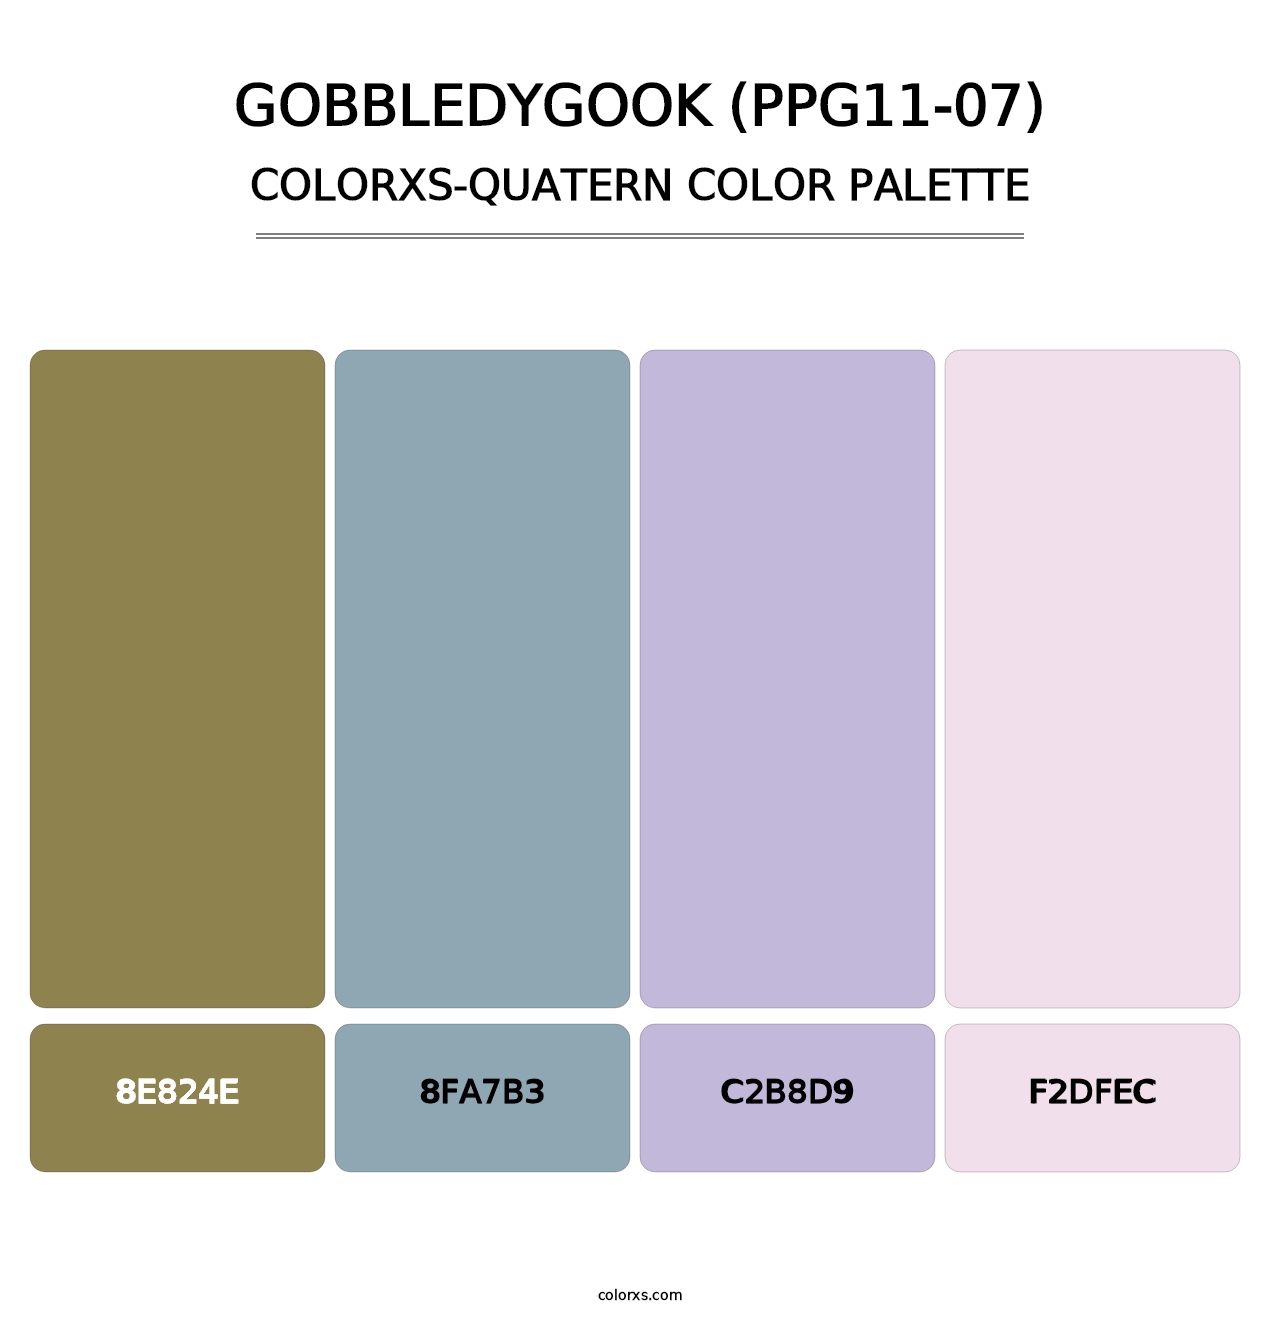 Gobbledygook (PPG11-07) - Colorxs Quatern Palette